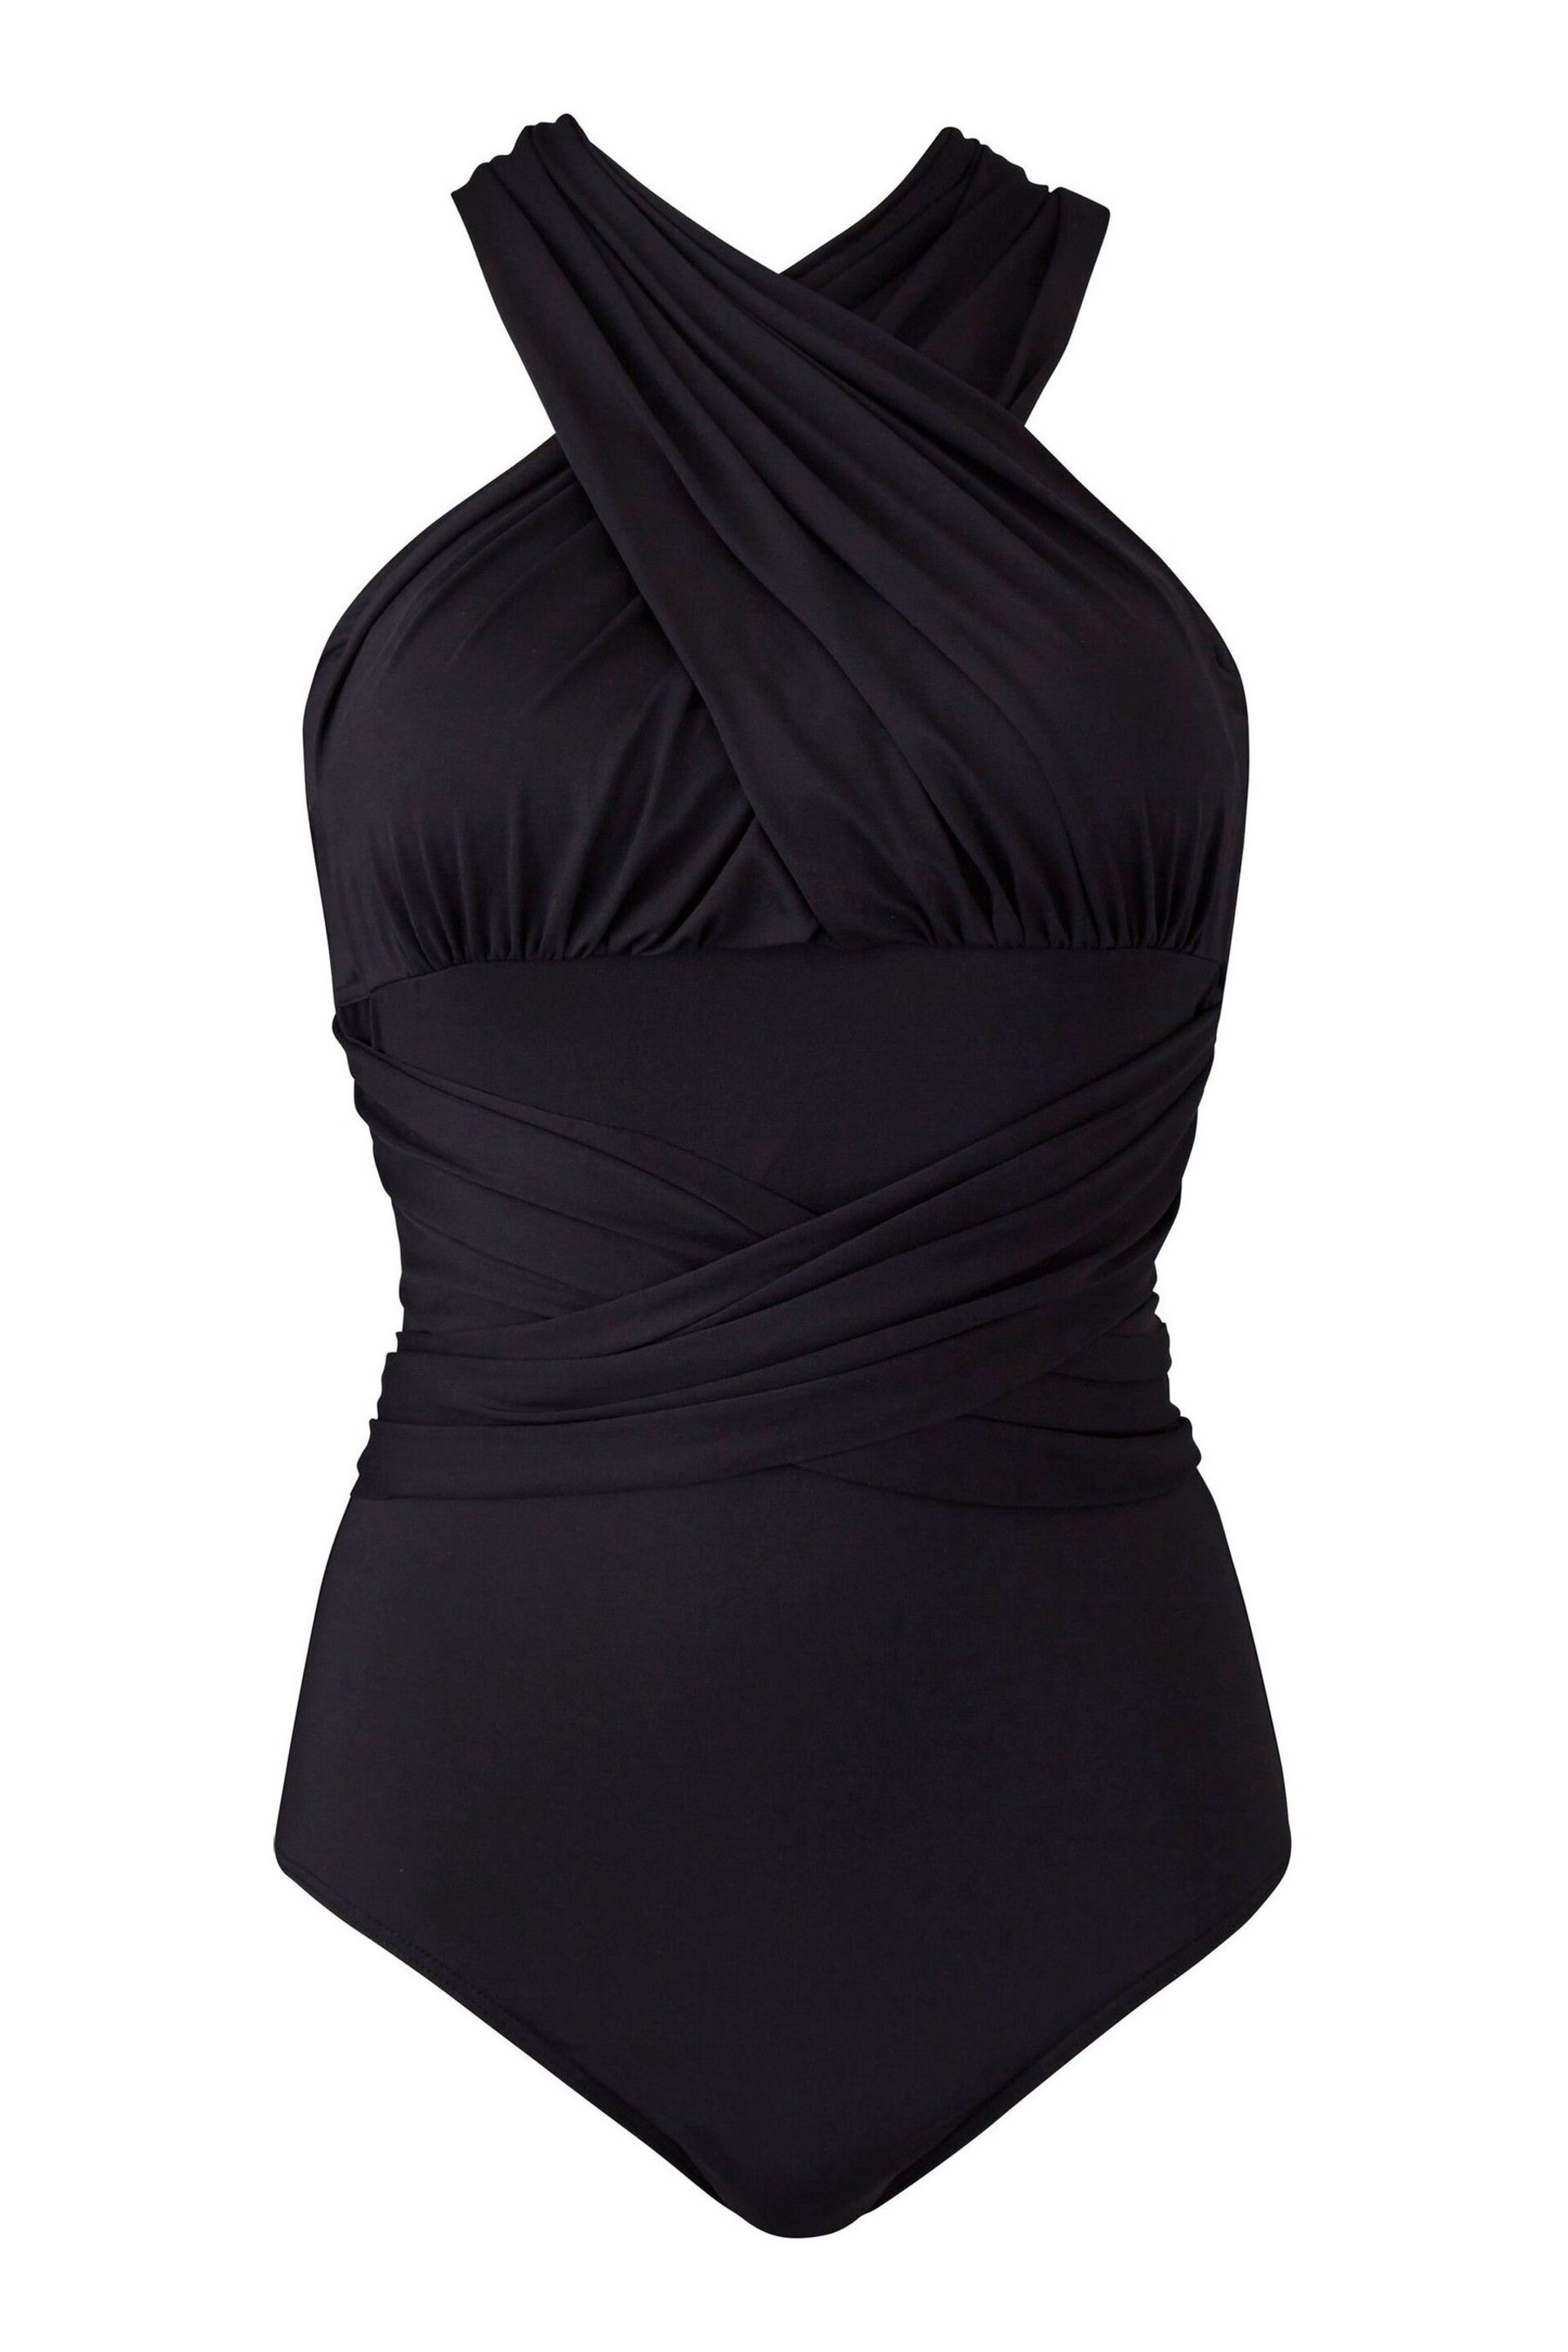 Simply Be Black Magisculpt Convertible Swimsuit - Image 4 of 6